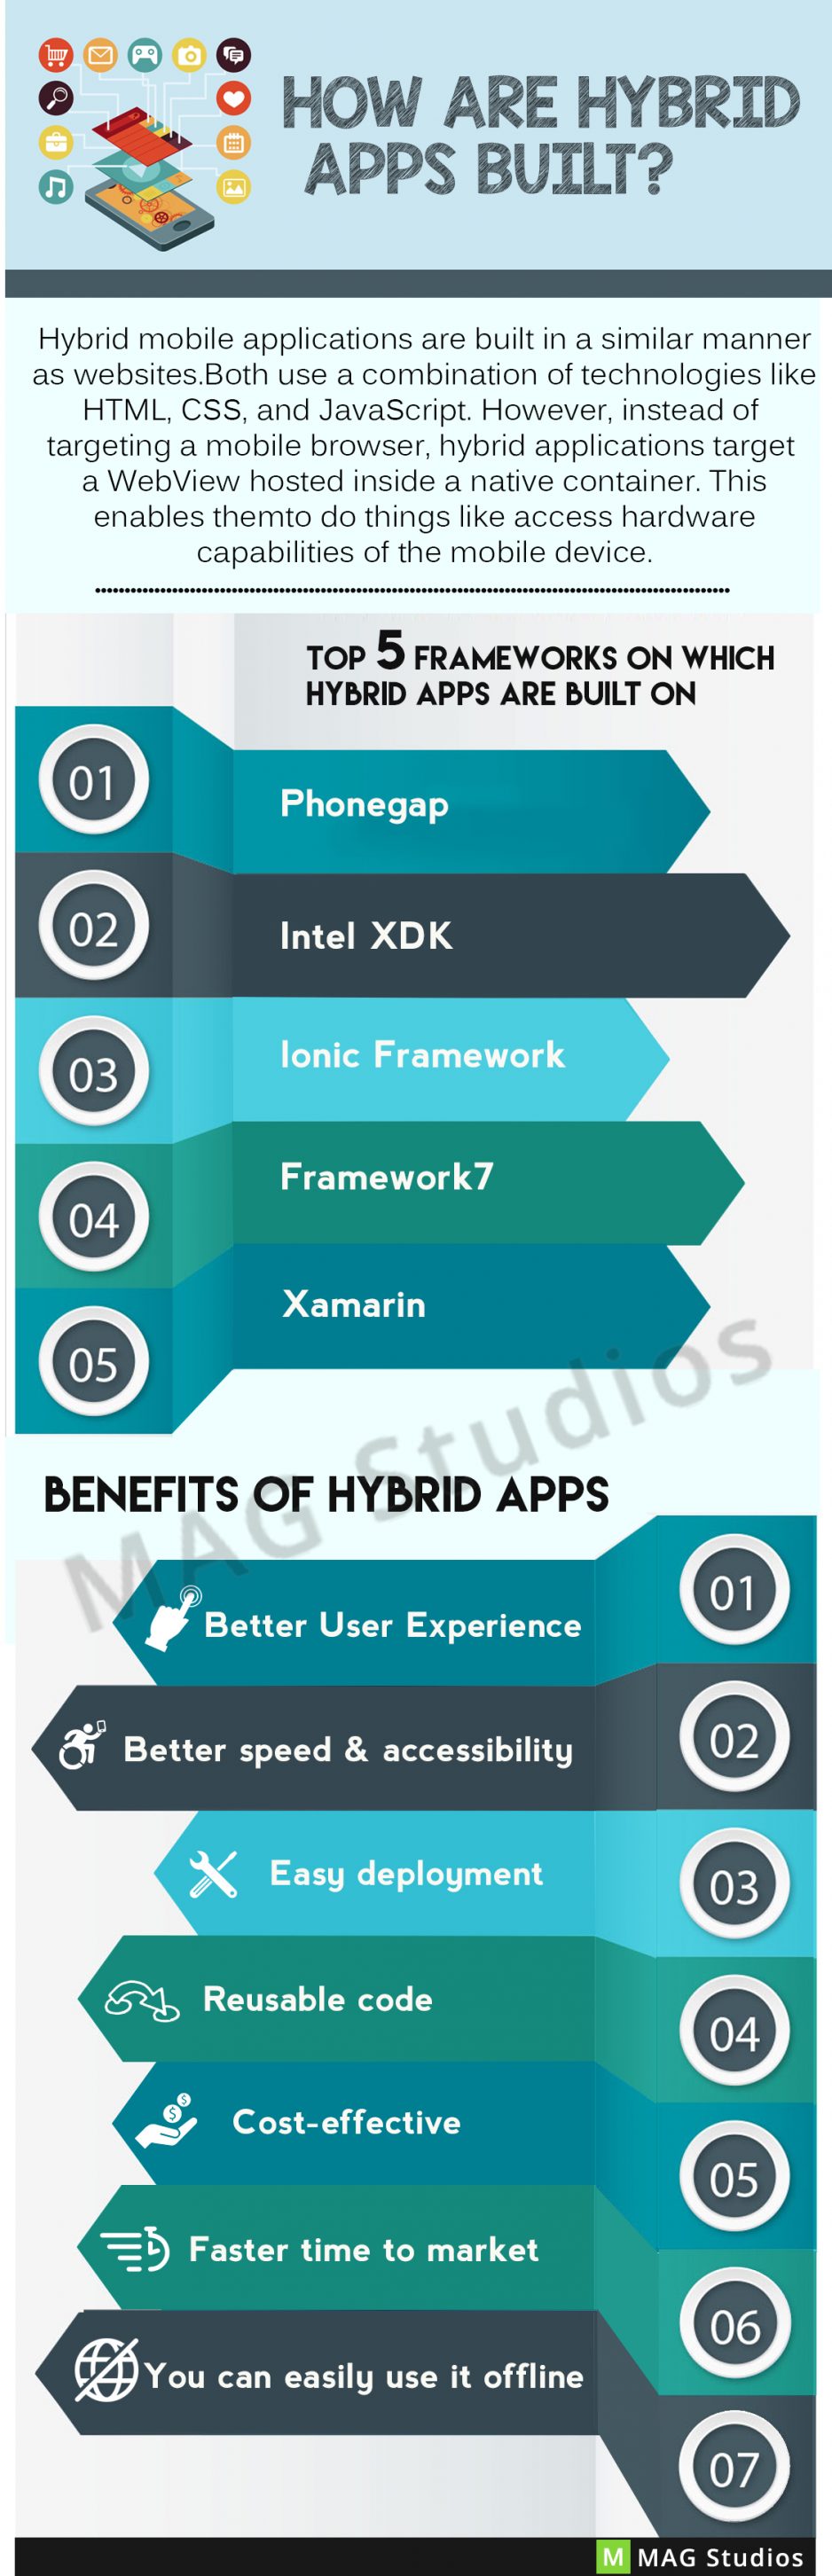 How are Hybrid Apps built and what are its benefits?